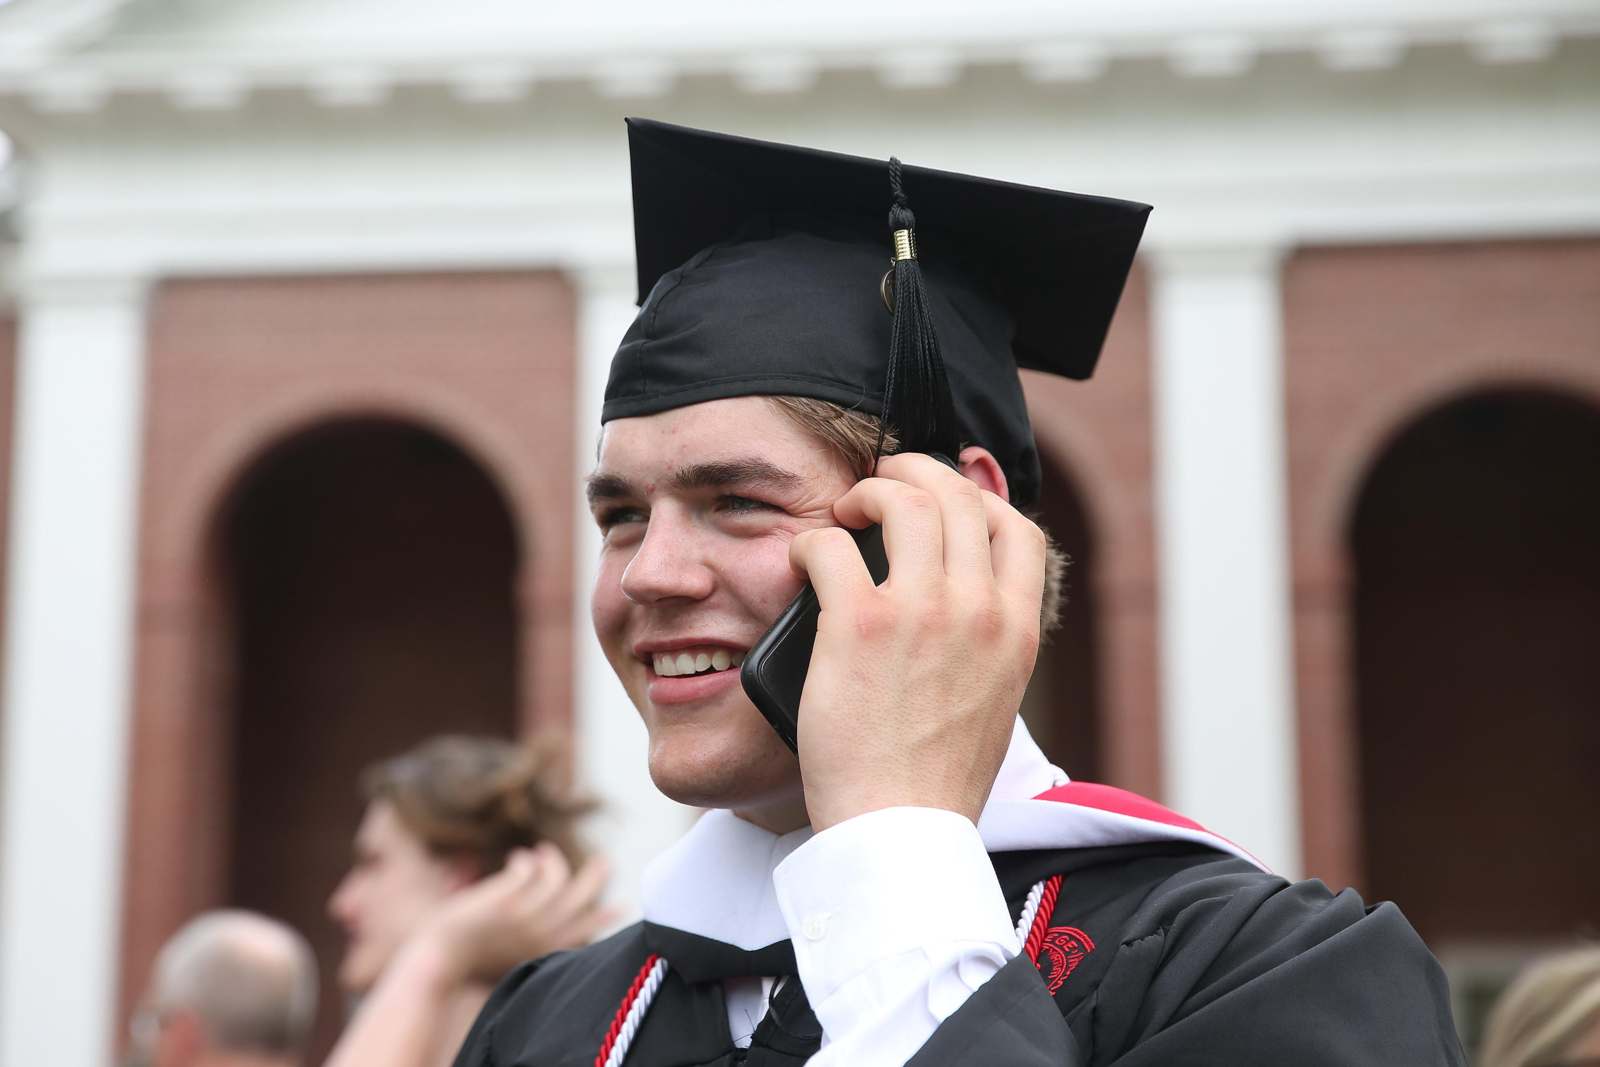 a man in a graduation cap and gown talking on a cell phone